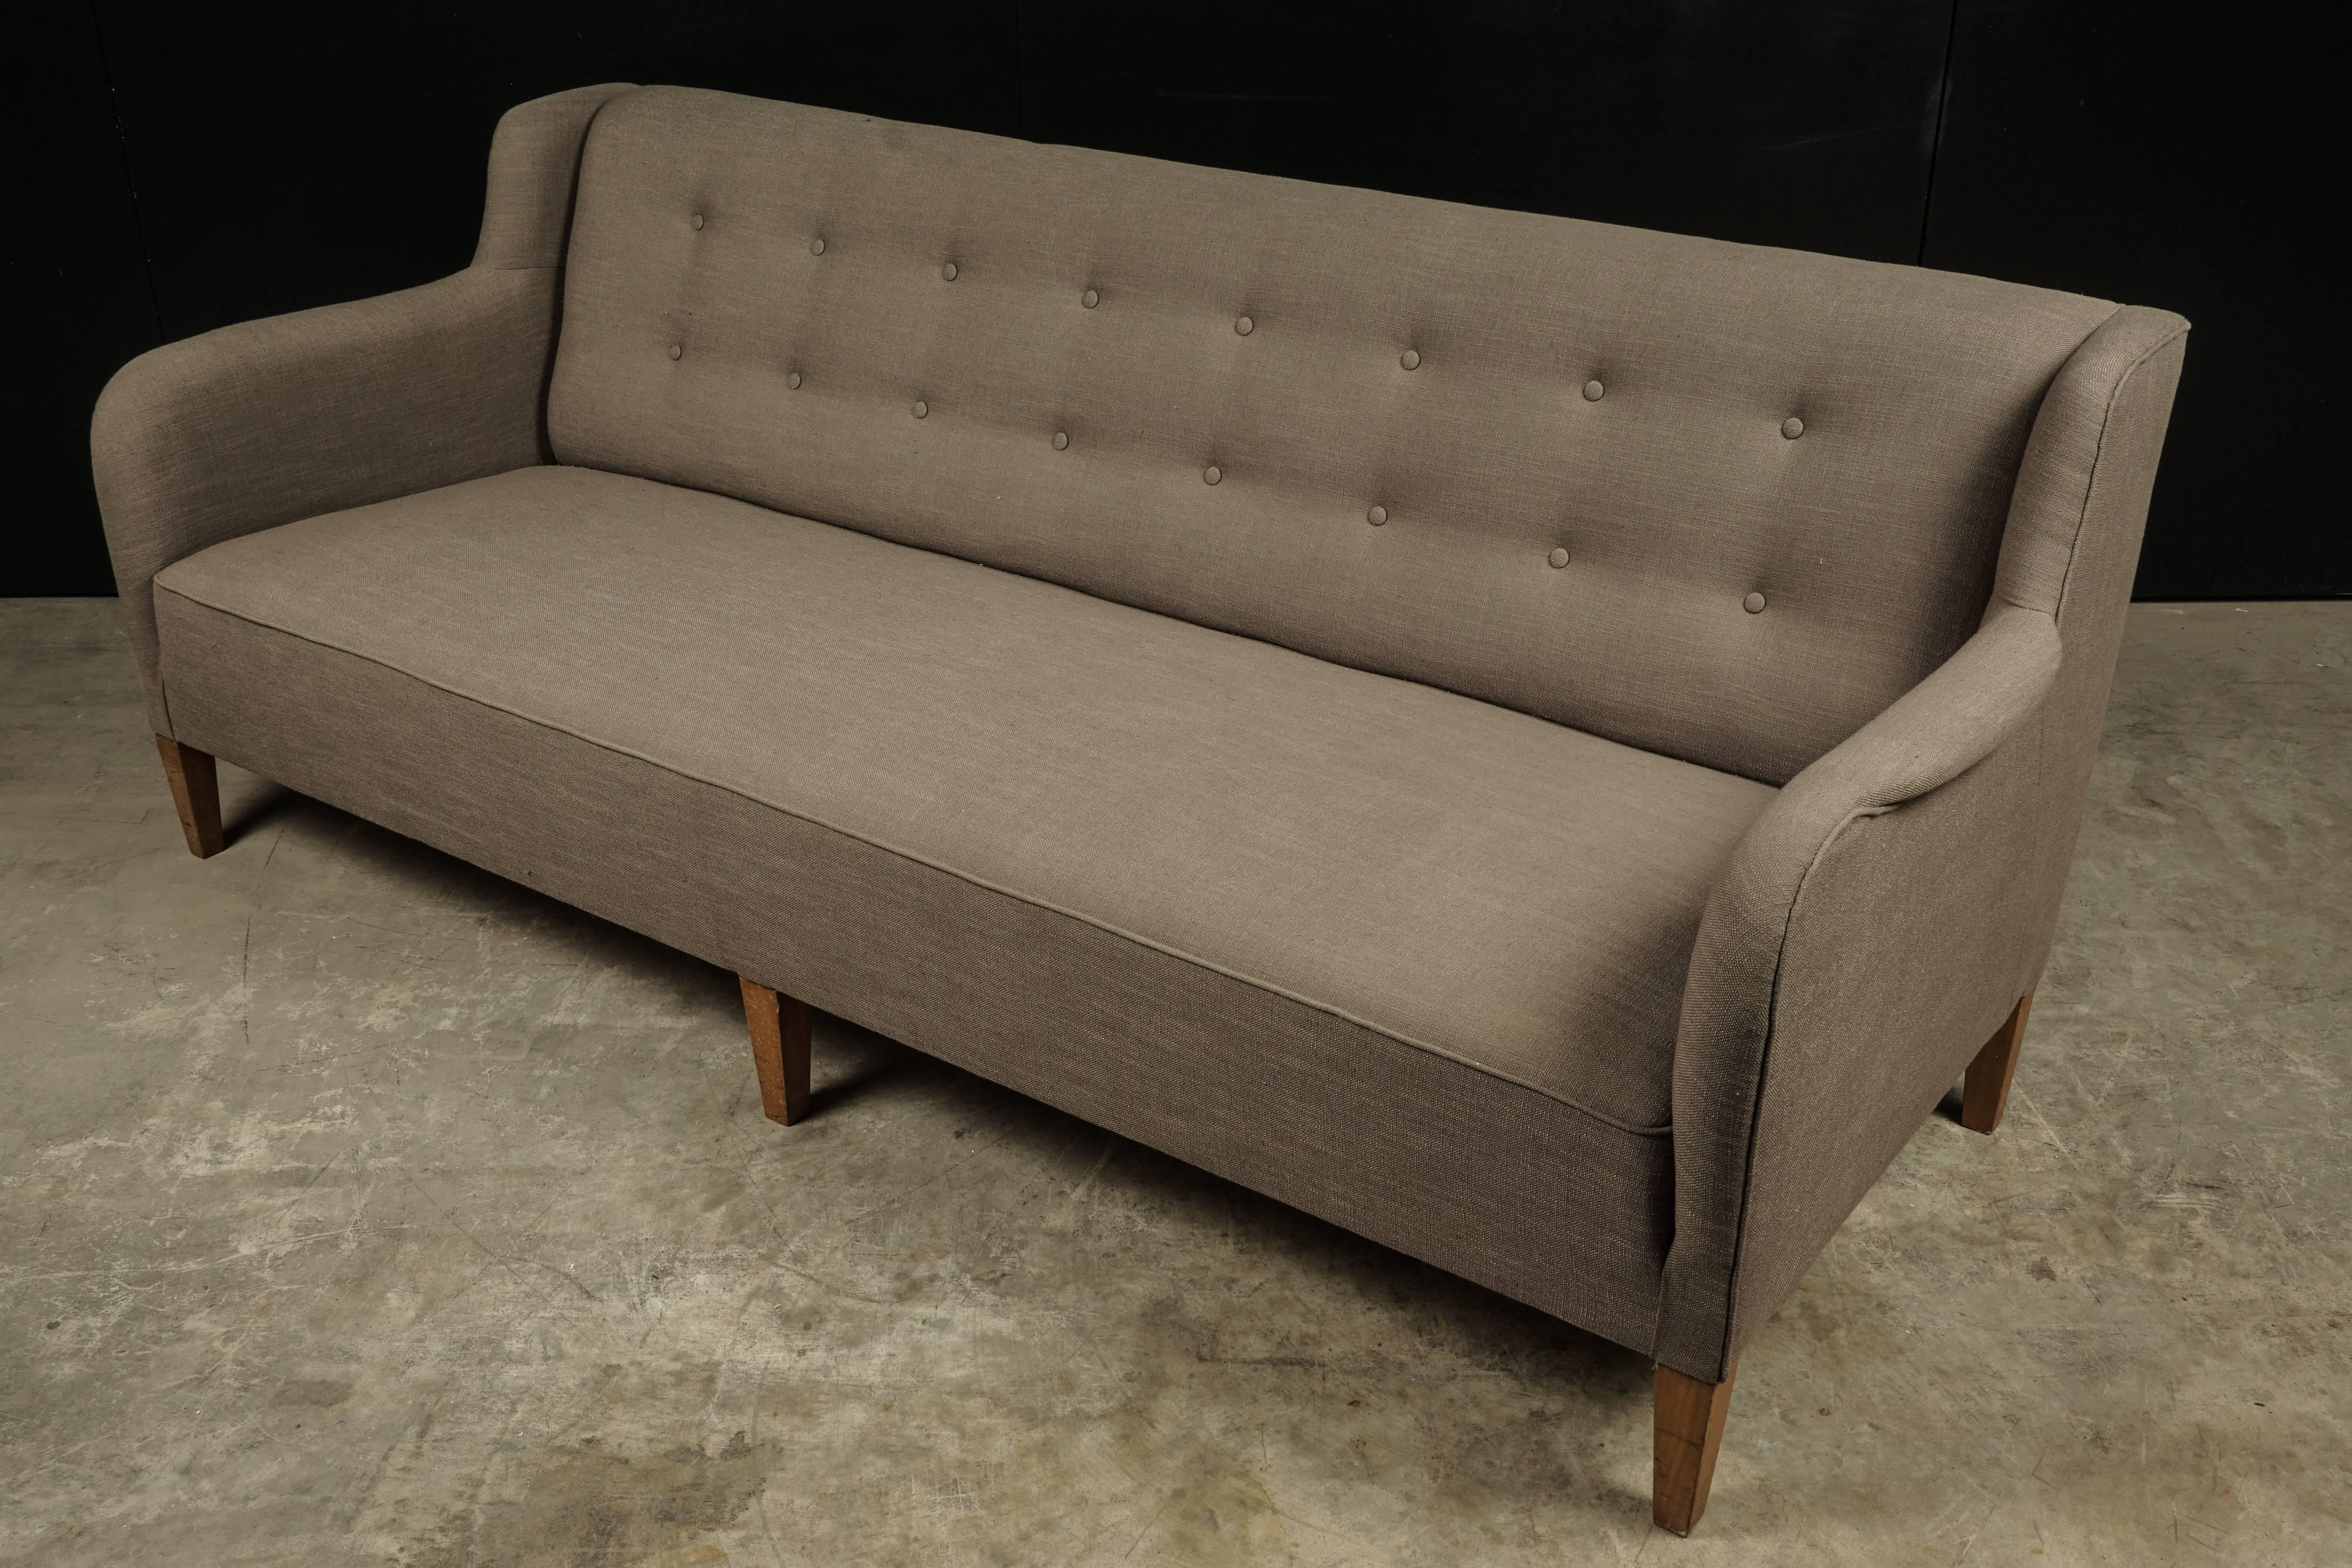 Midcentury sofa from Denmark in the manner of Flemming Lassen, circa 1980. Upholstered in grey linen with solid birch feet.
Measures: Seat height 15